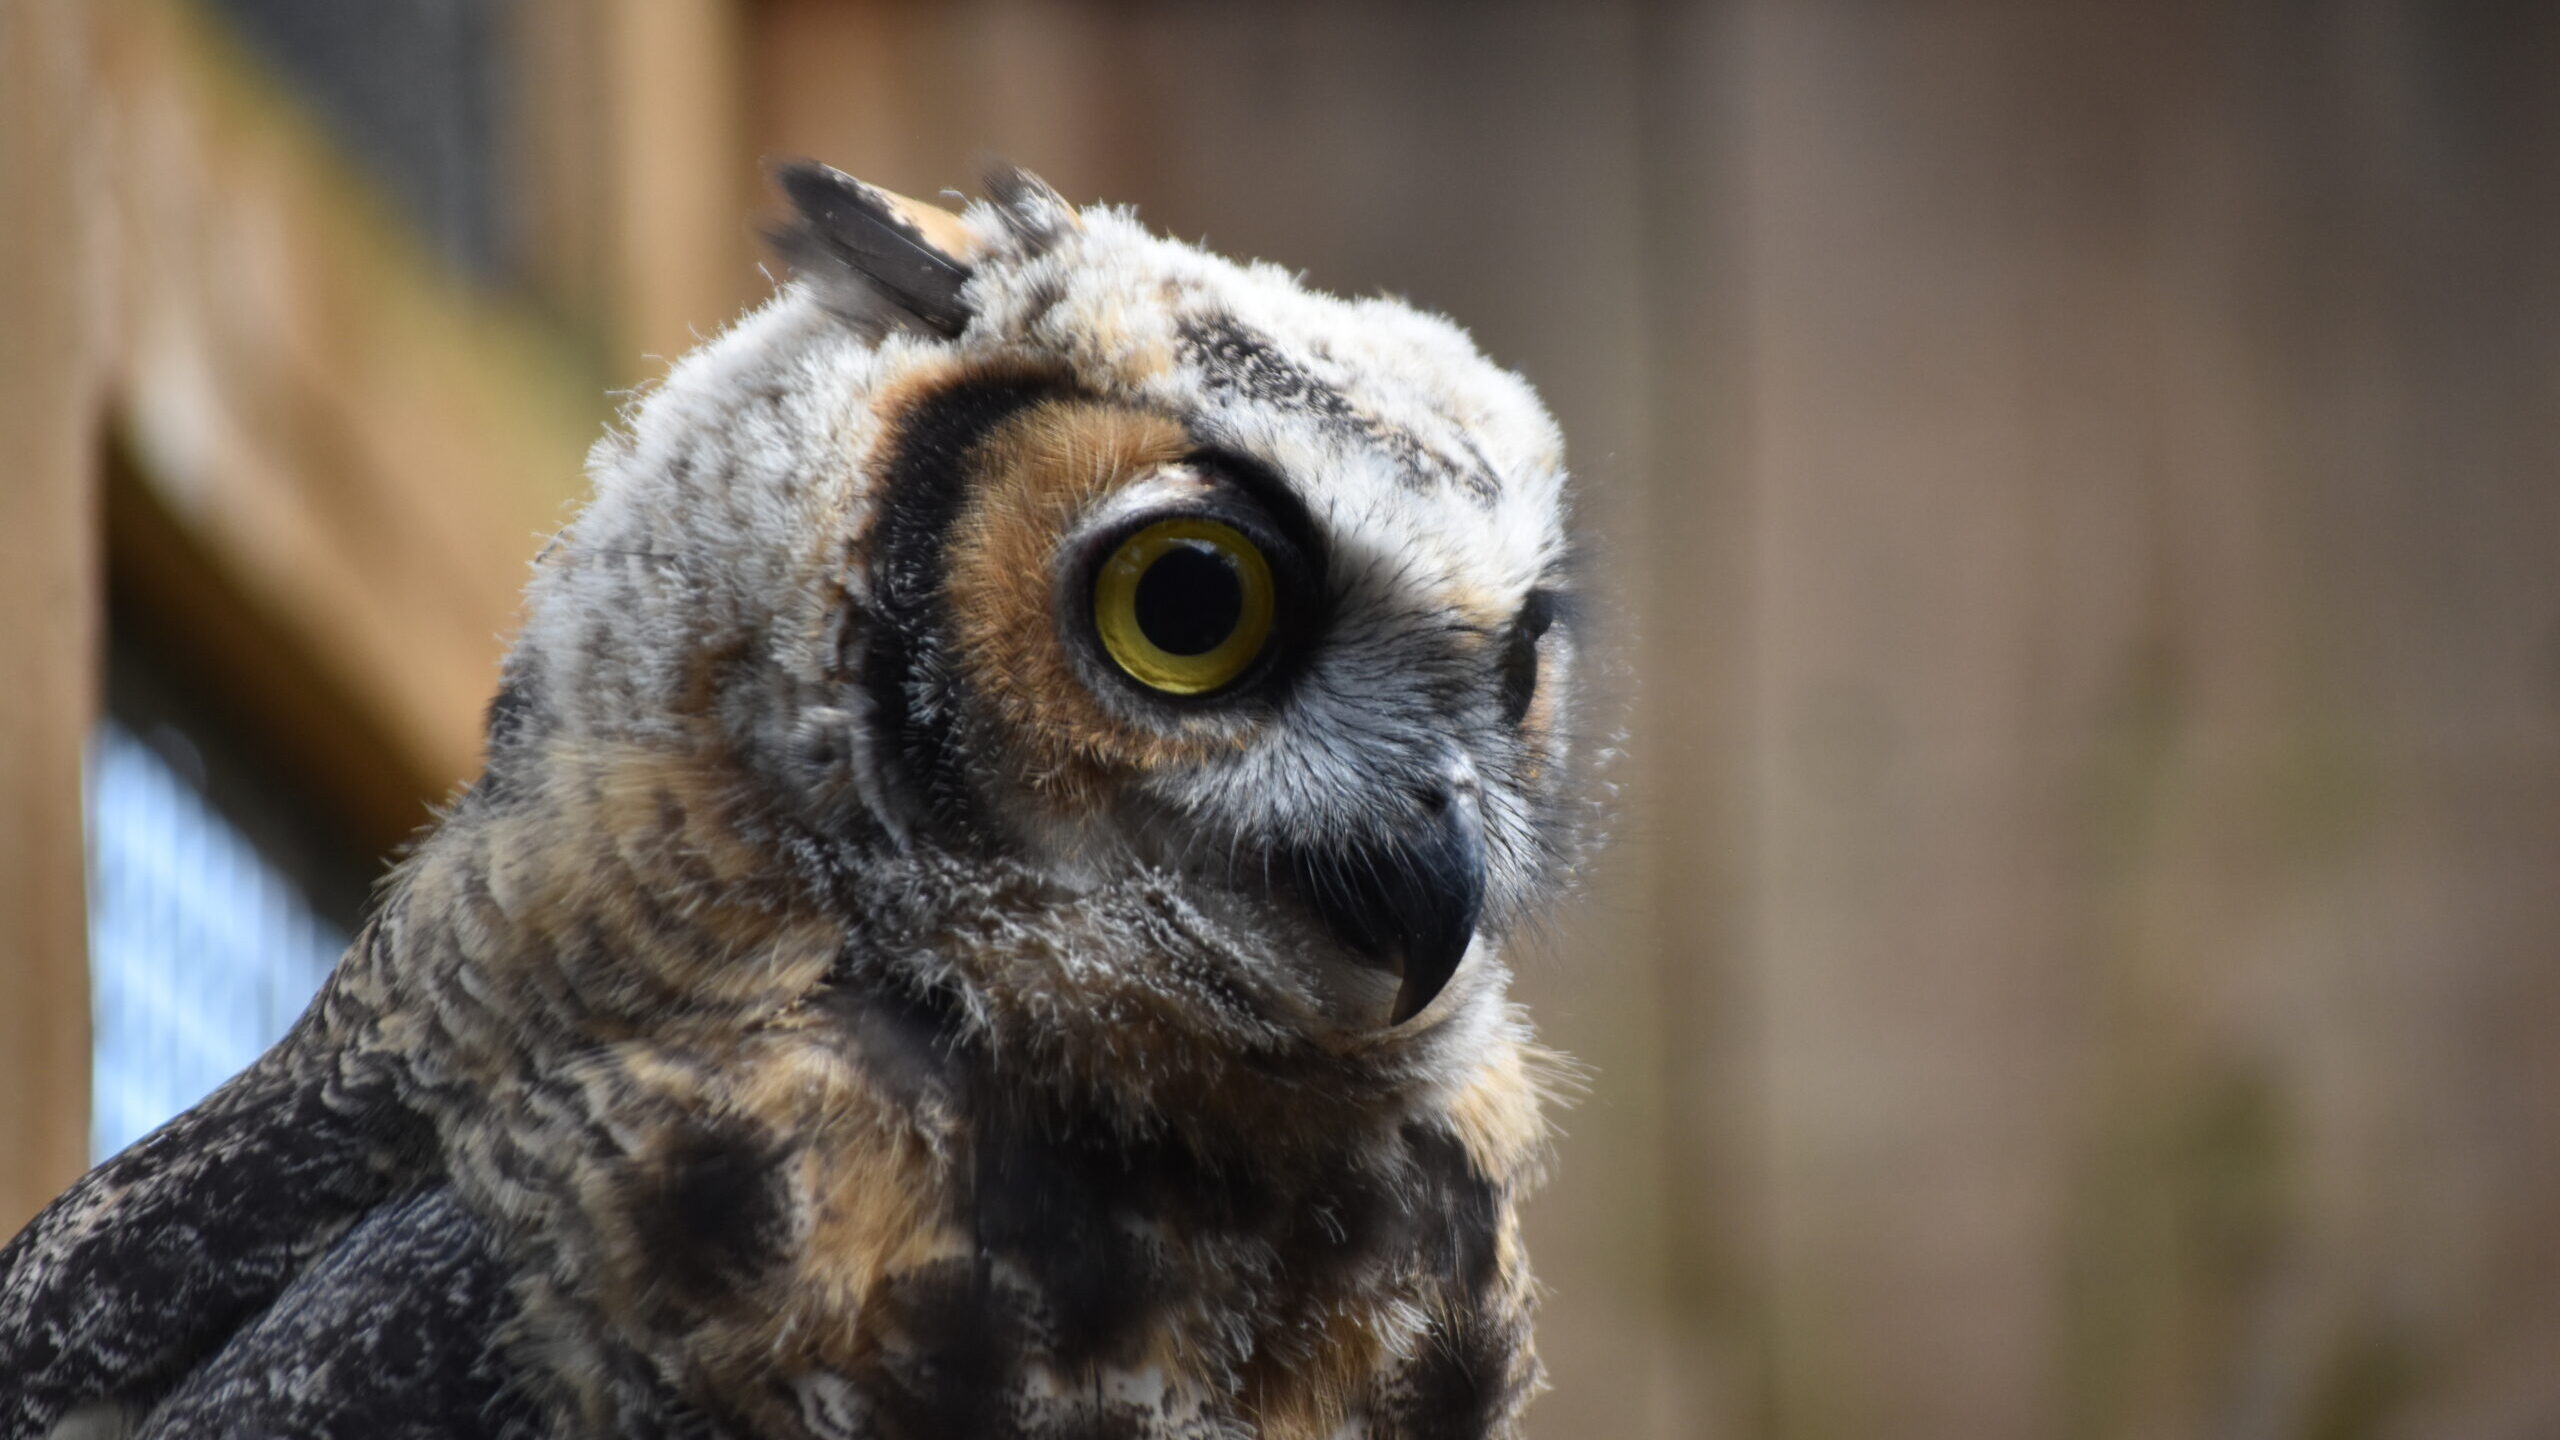 Sunny, the Great Horned Owl